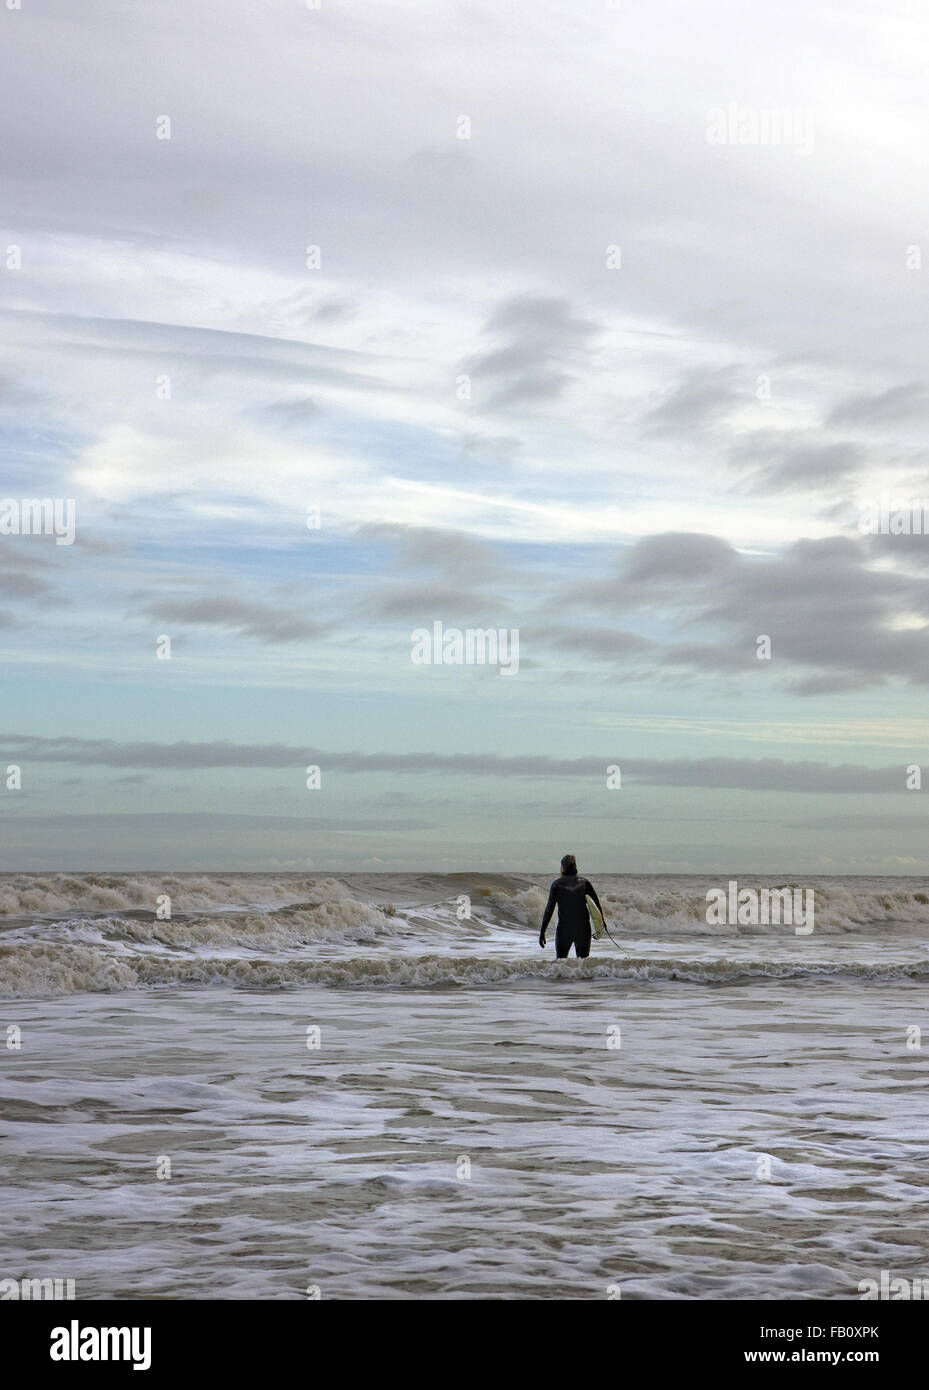 Surfer silhouetted walking through the surf in a winter sea Stock Photo